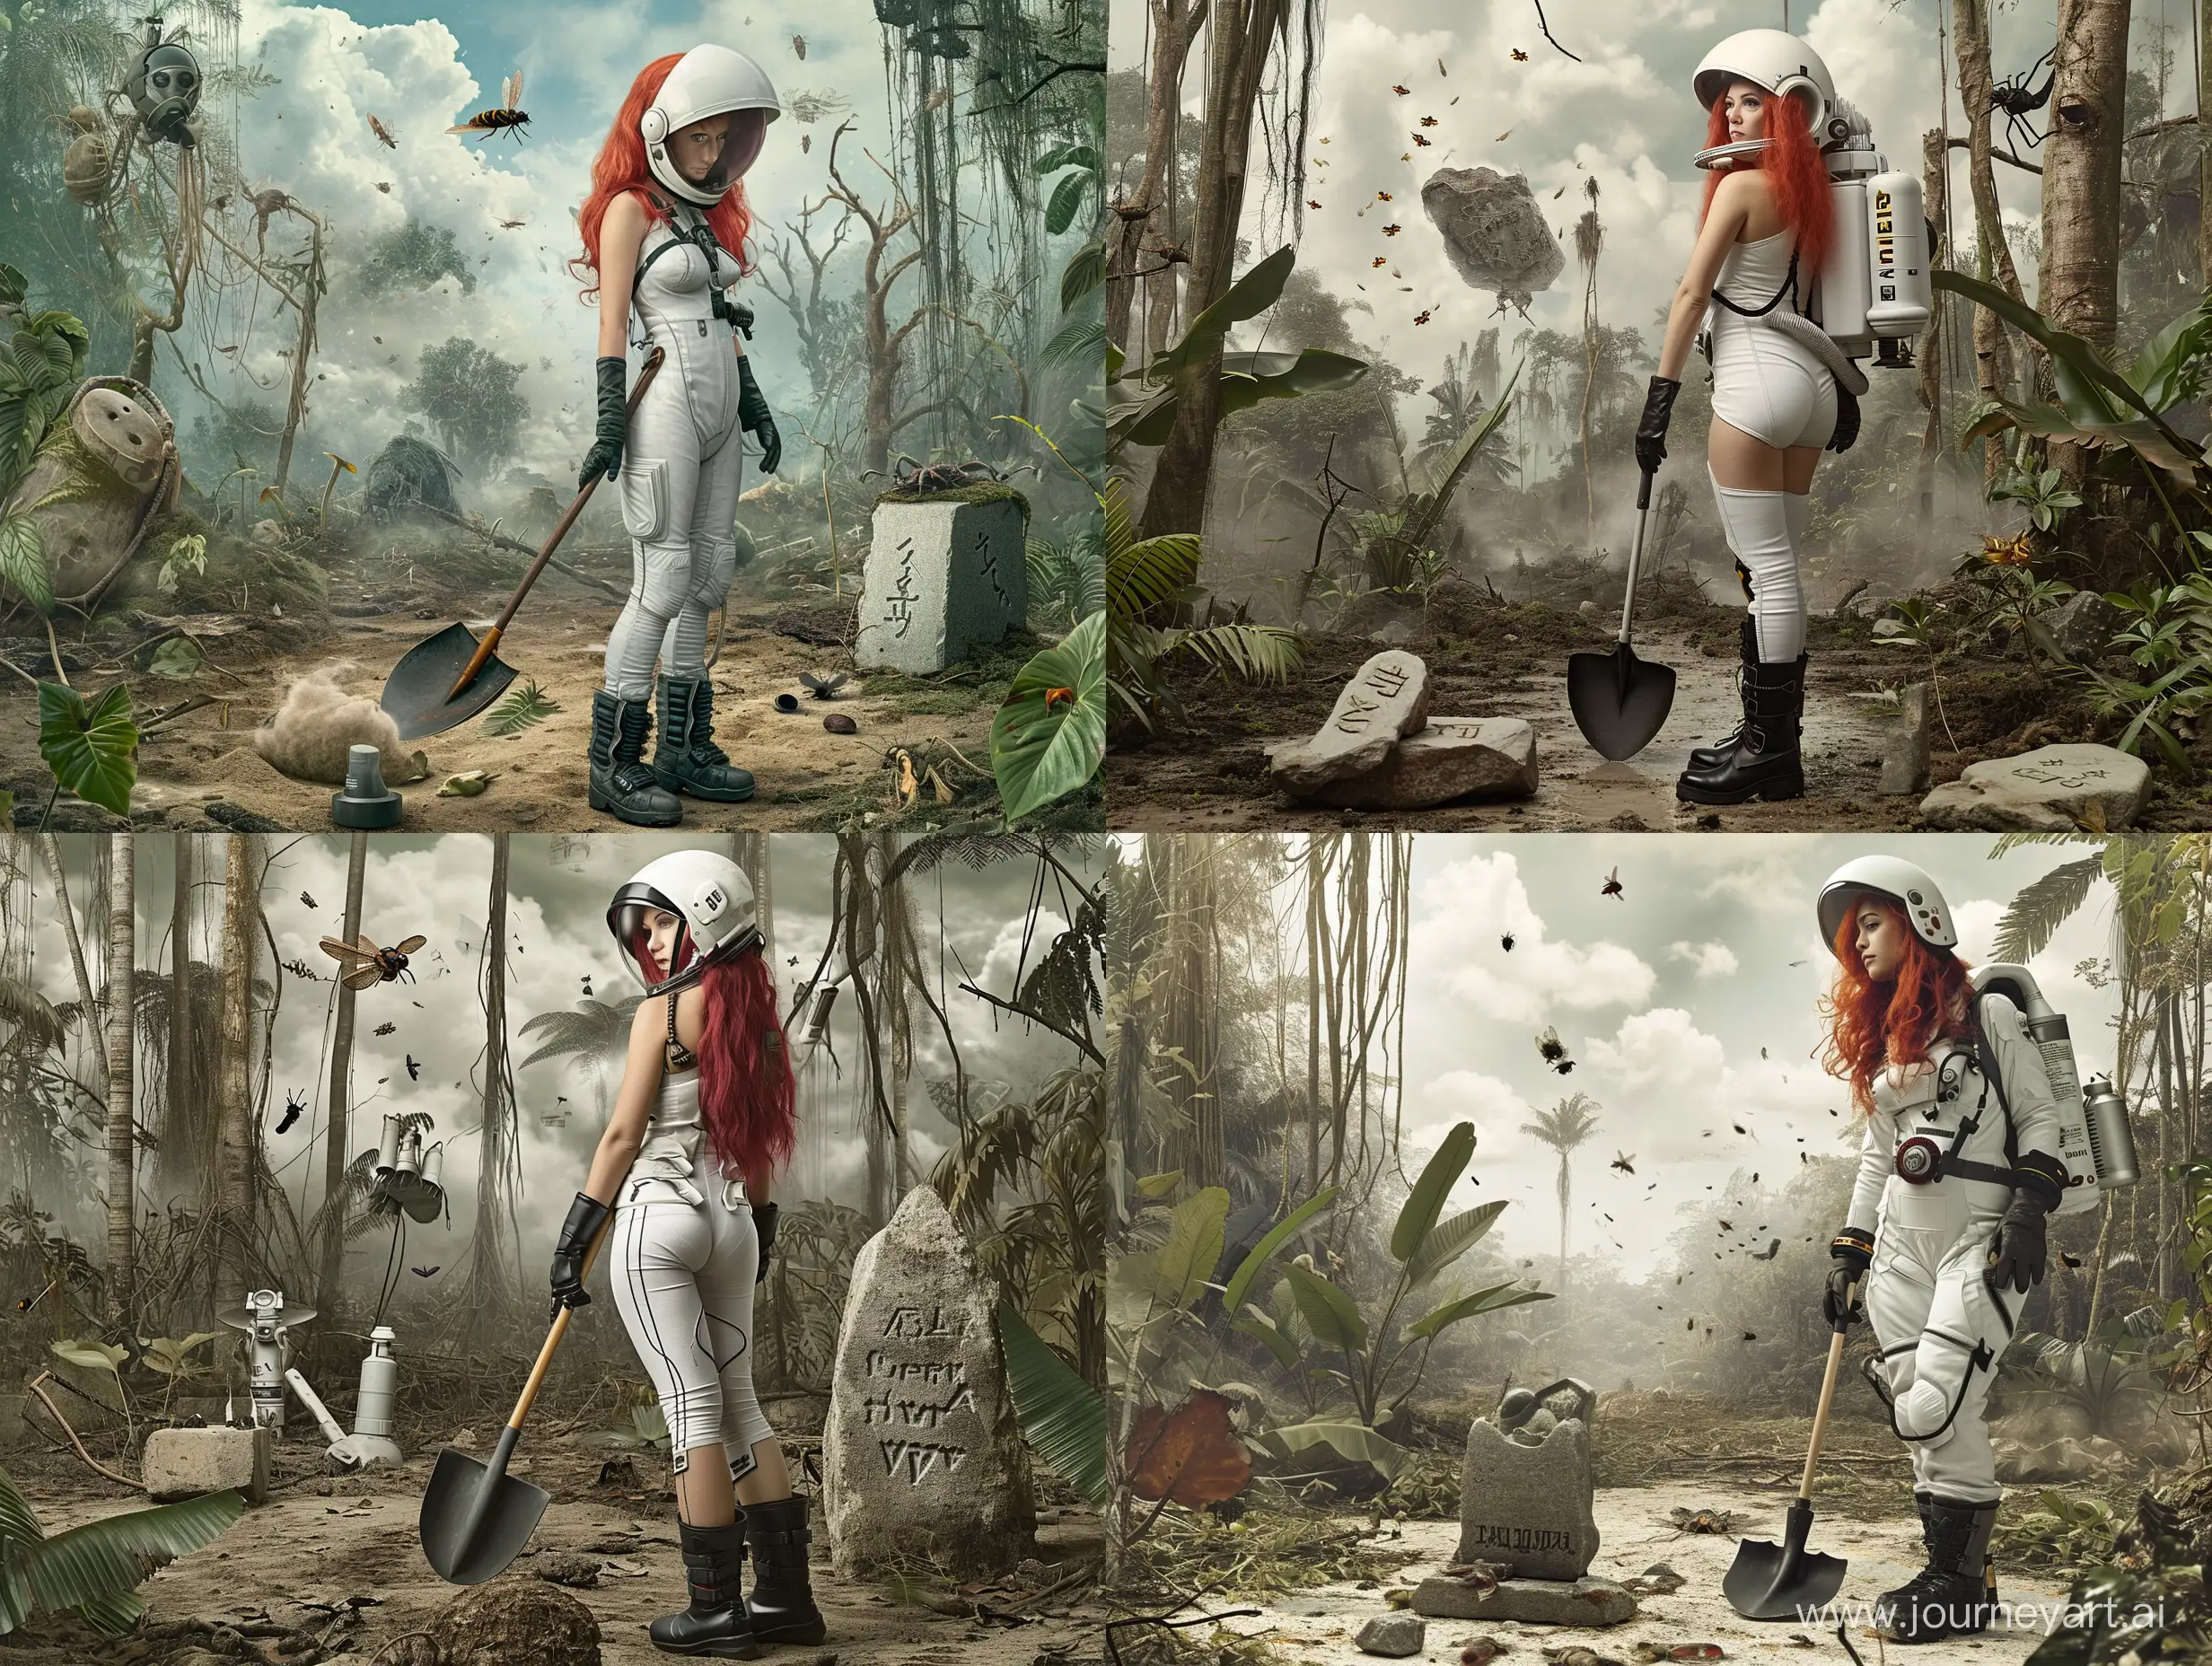 RedHaired-Cosmonaut-Woman-in-Jungle-with-Shovel-and-Helmet